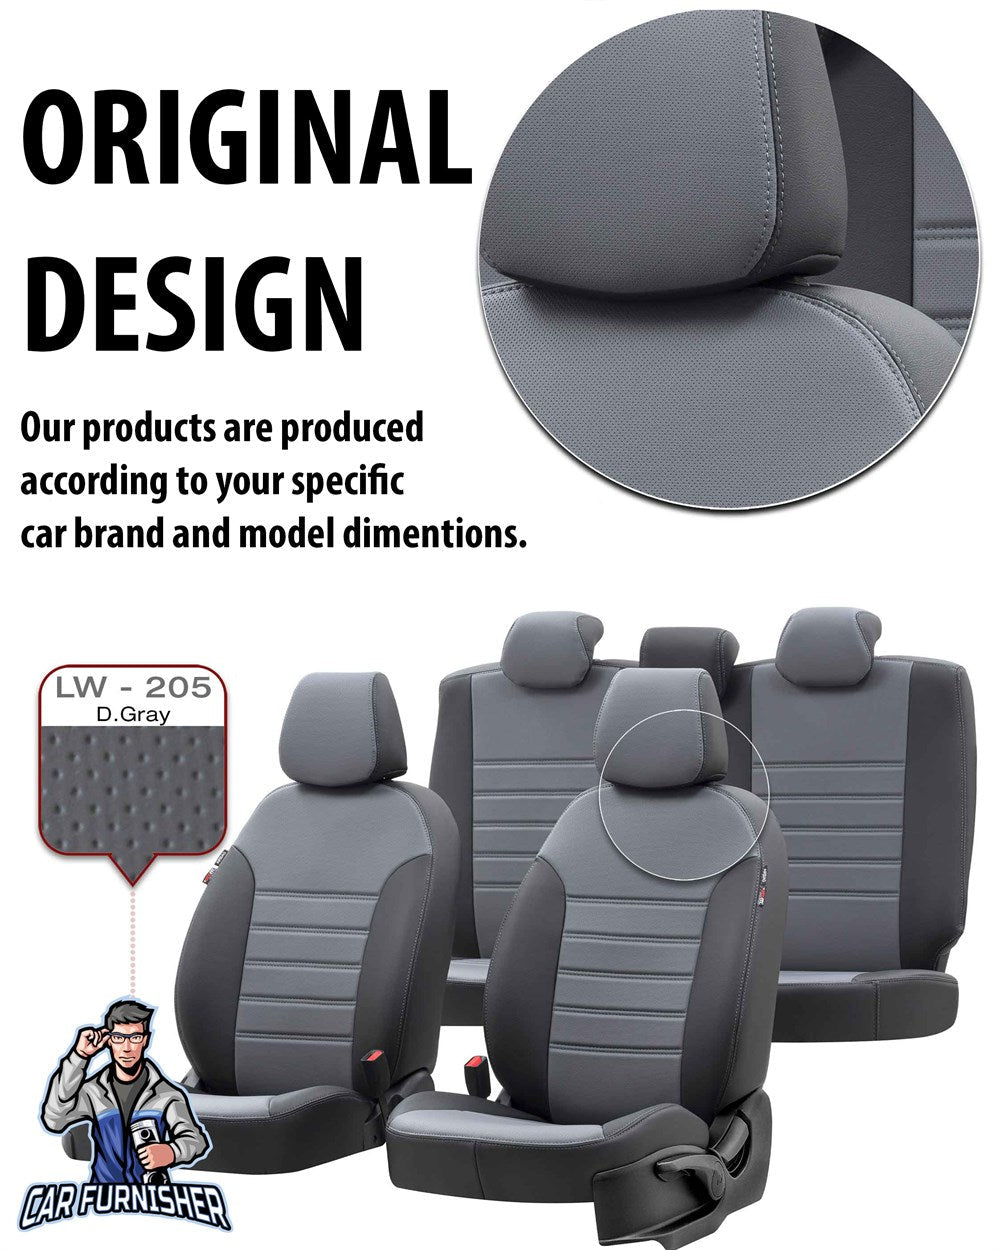 Fiat Marea Car Seat Covers 1996-2007 Istanbul Design Smoked Full Set (5 Seats + Handrest) Leather & Fabric